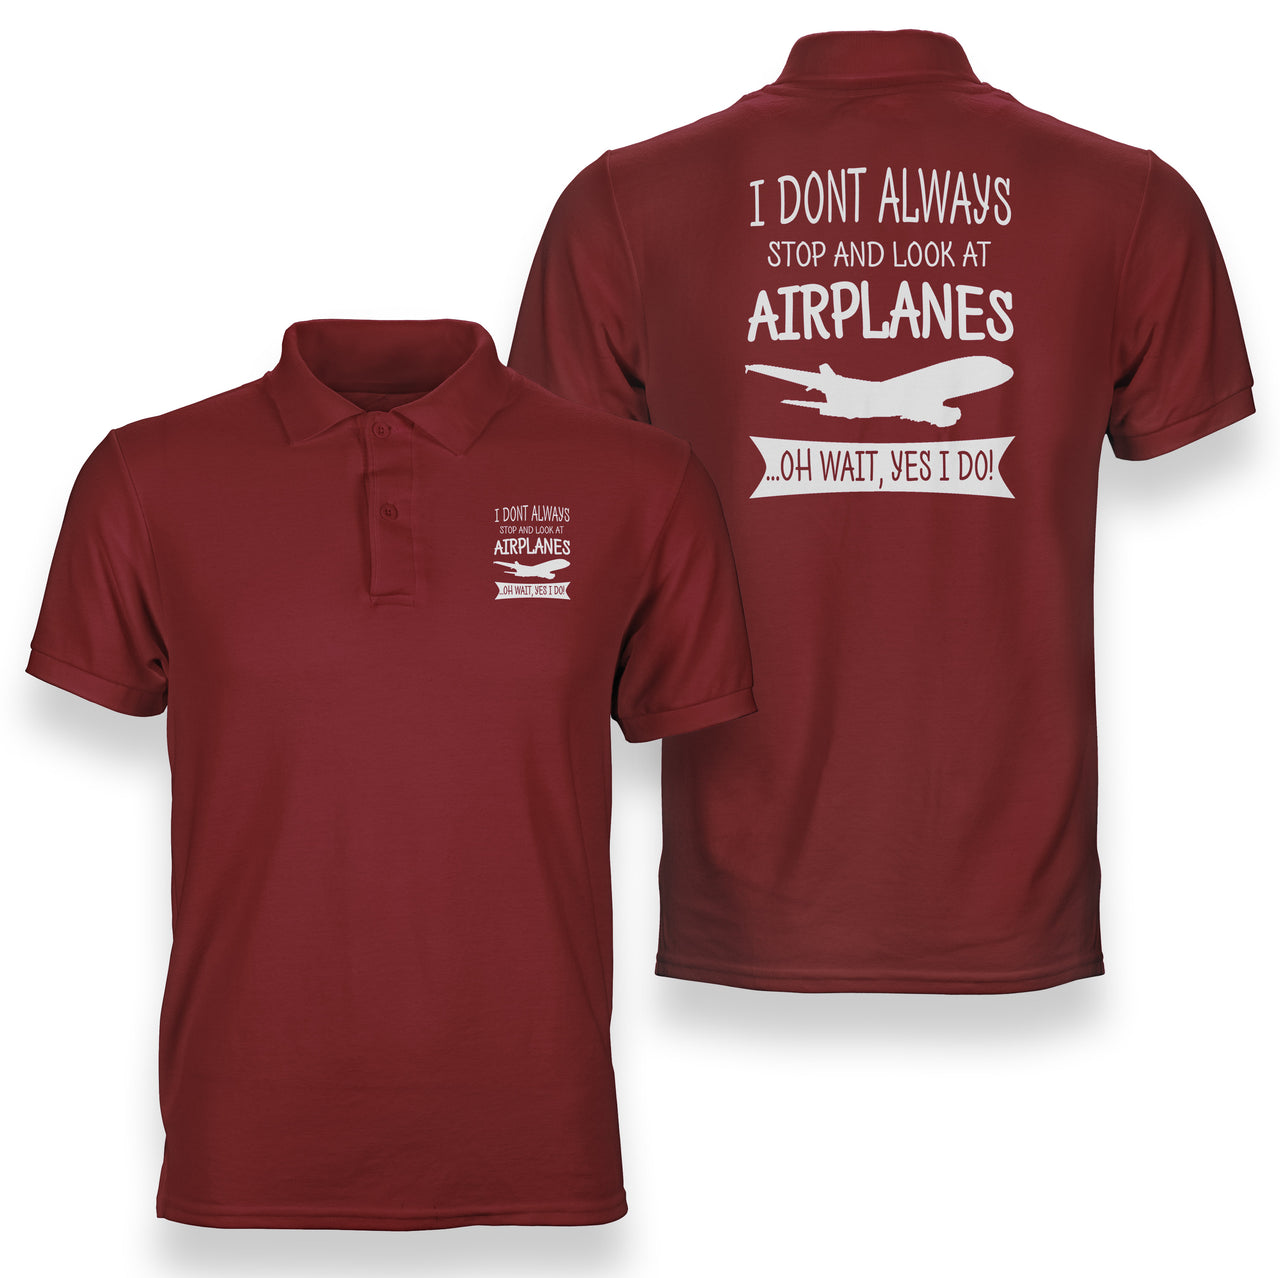 I Don't Always Stop and Look at Airplanes Designed Double Side Polo T-Shirts